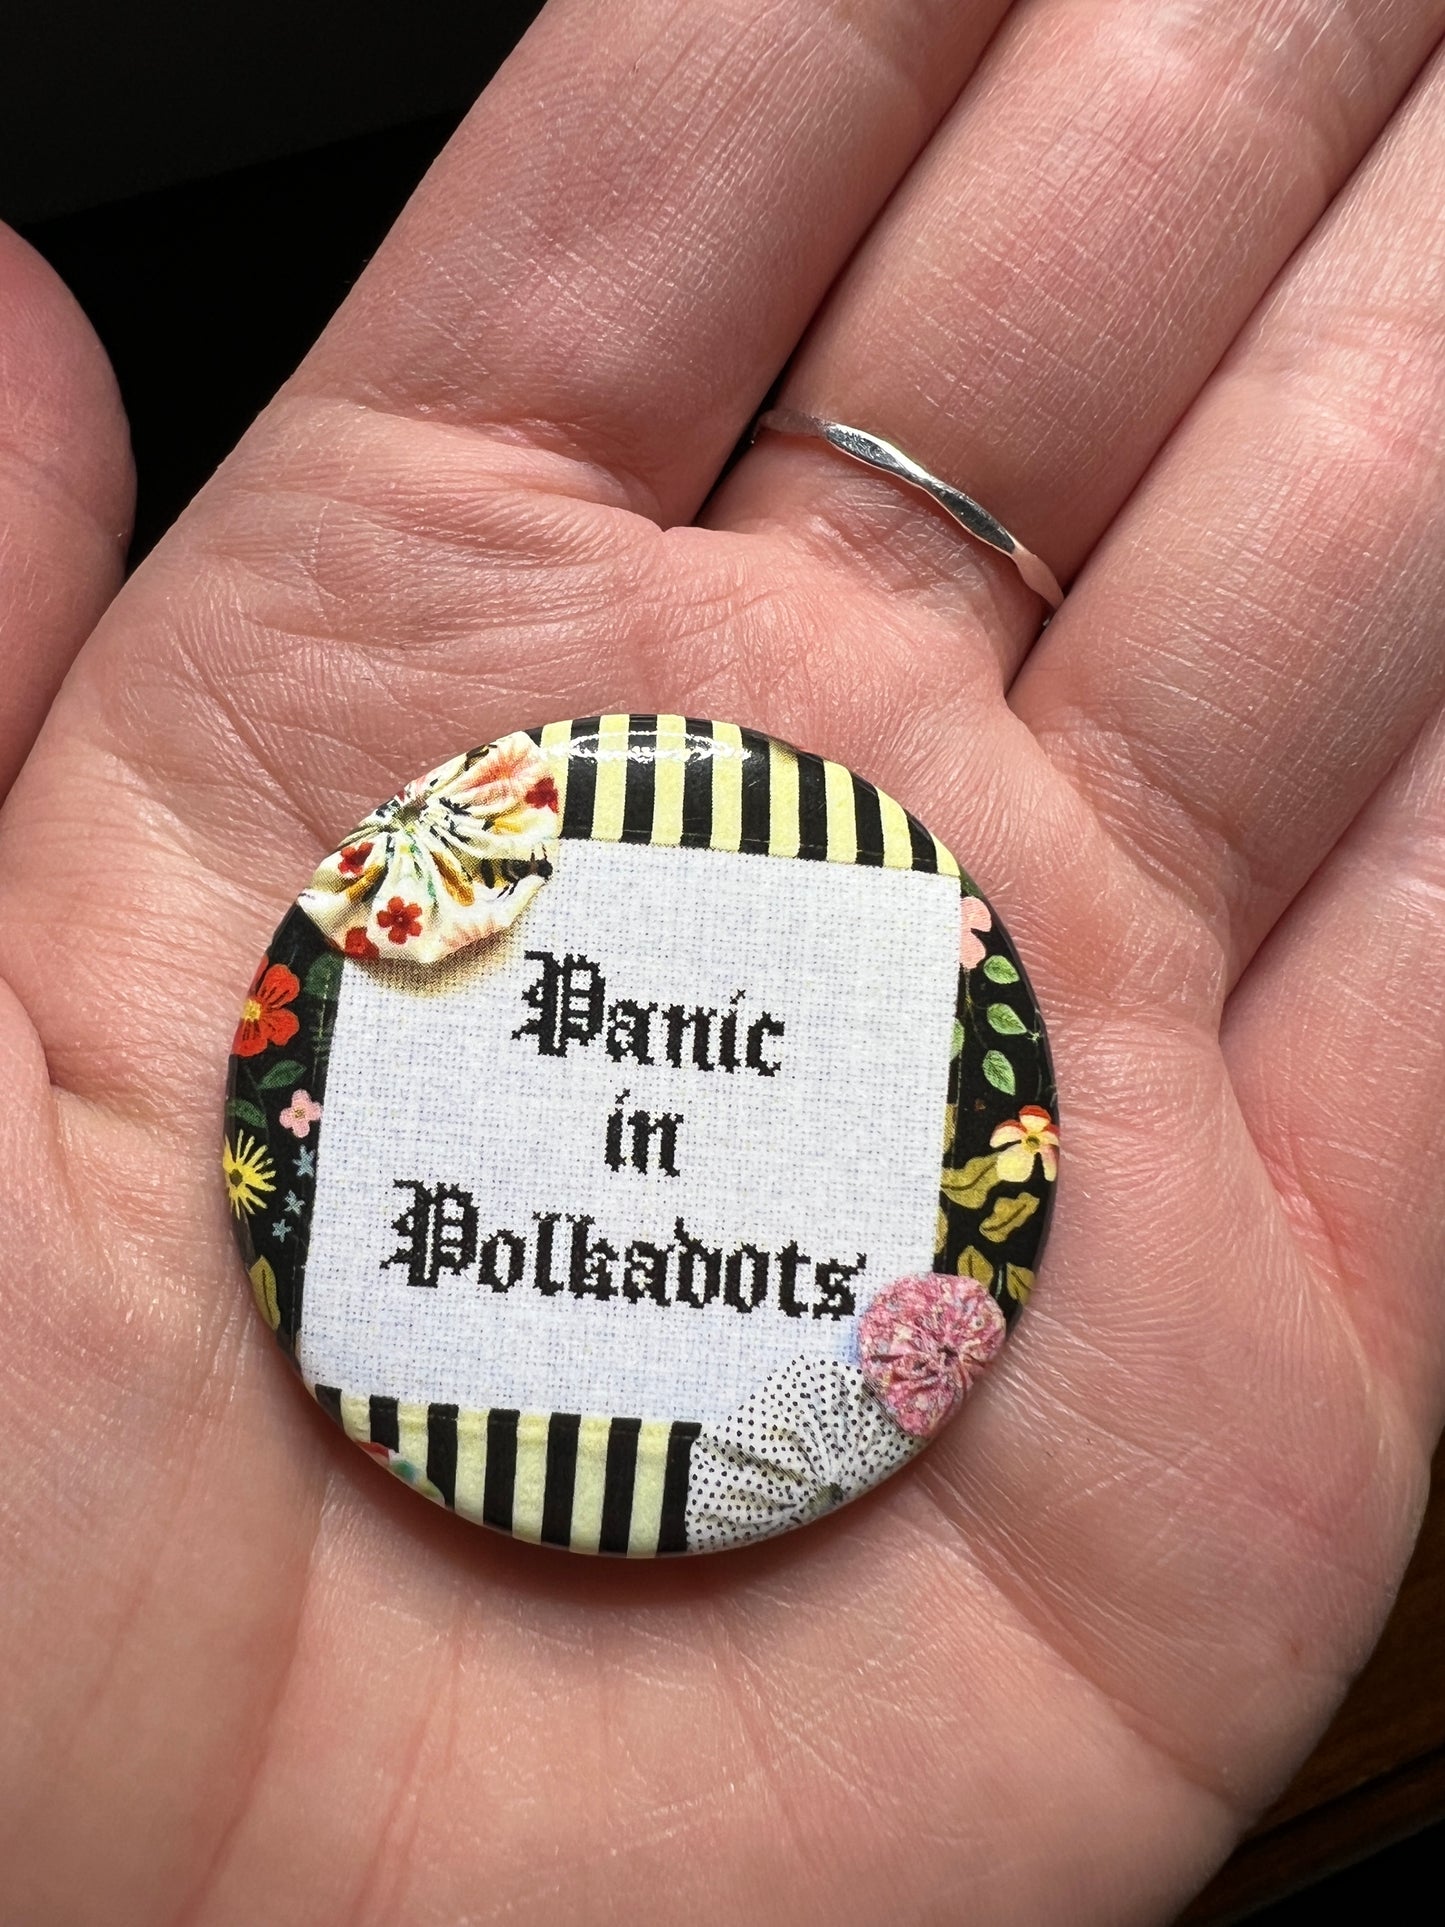 A single panic in polkadots button held in hand for scale